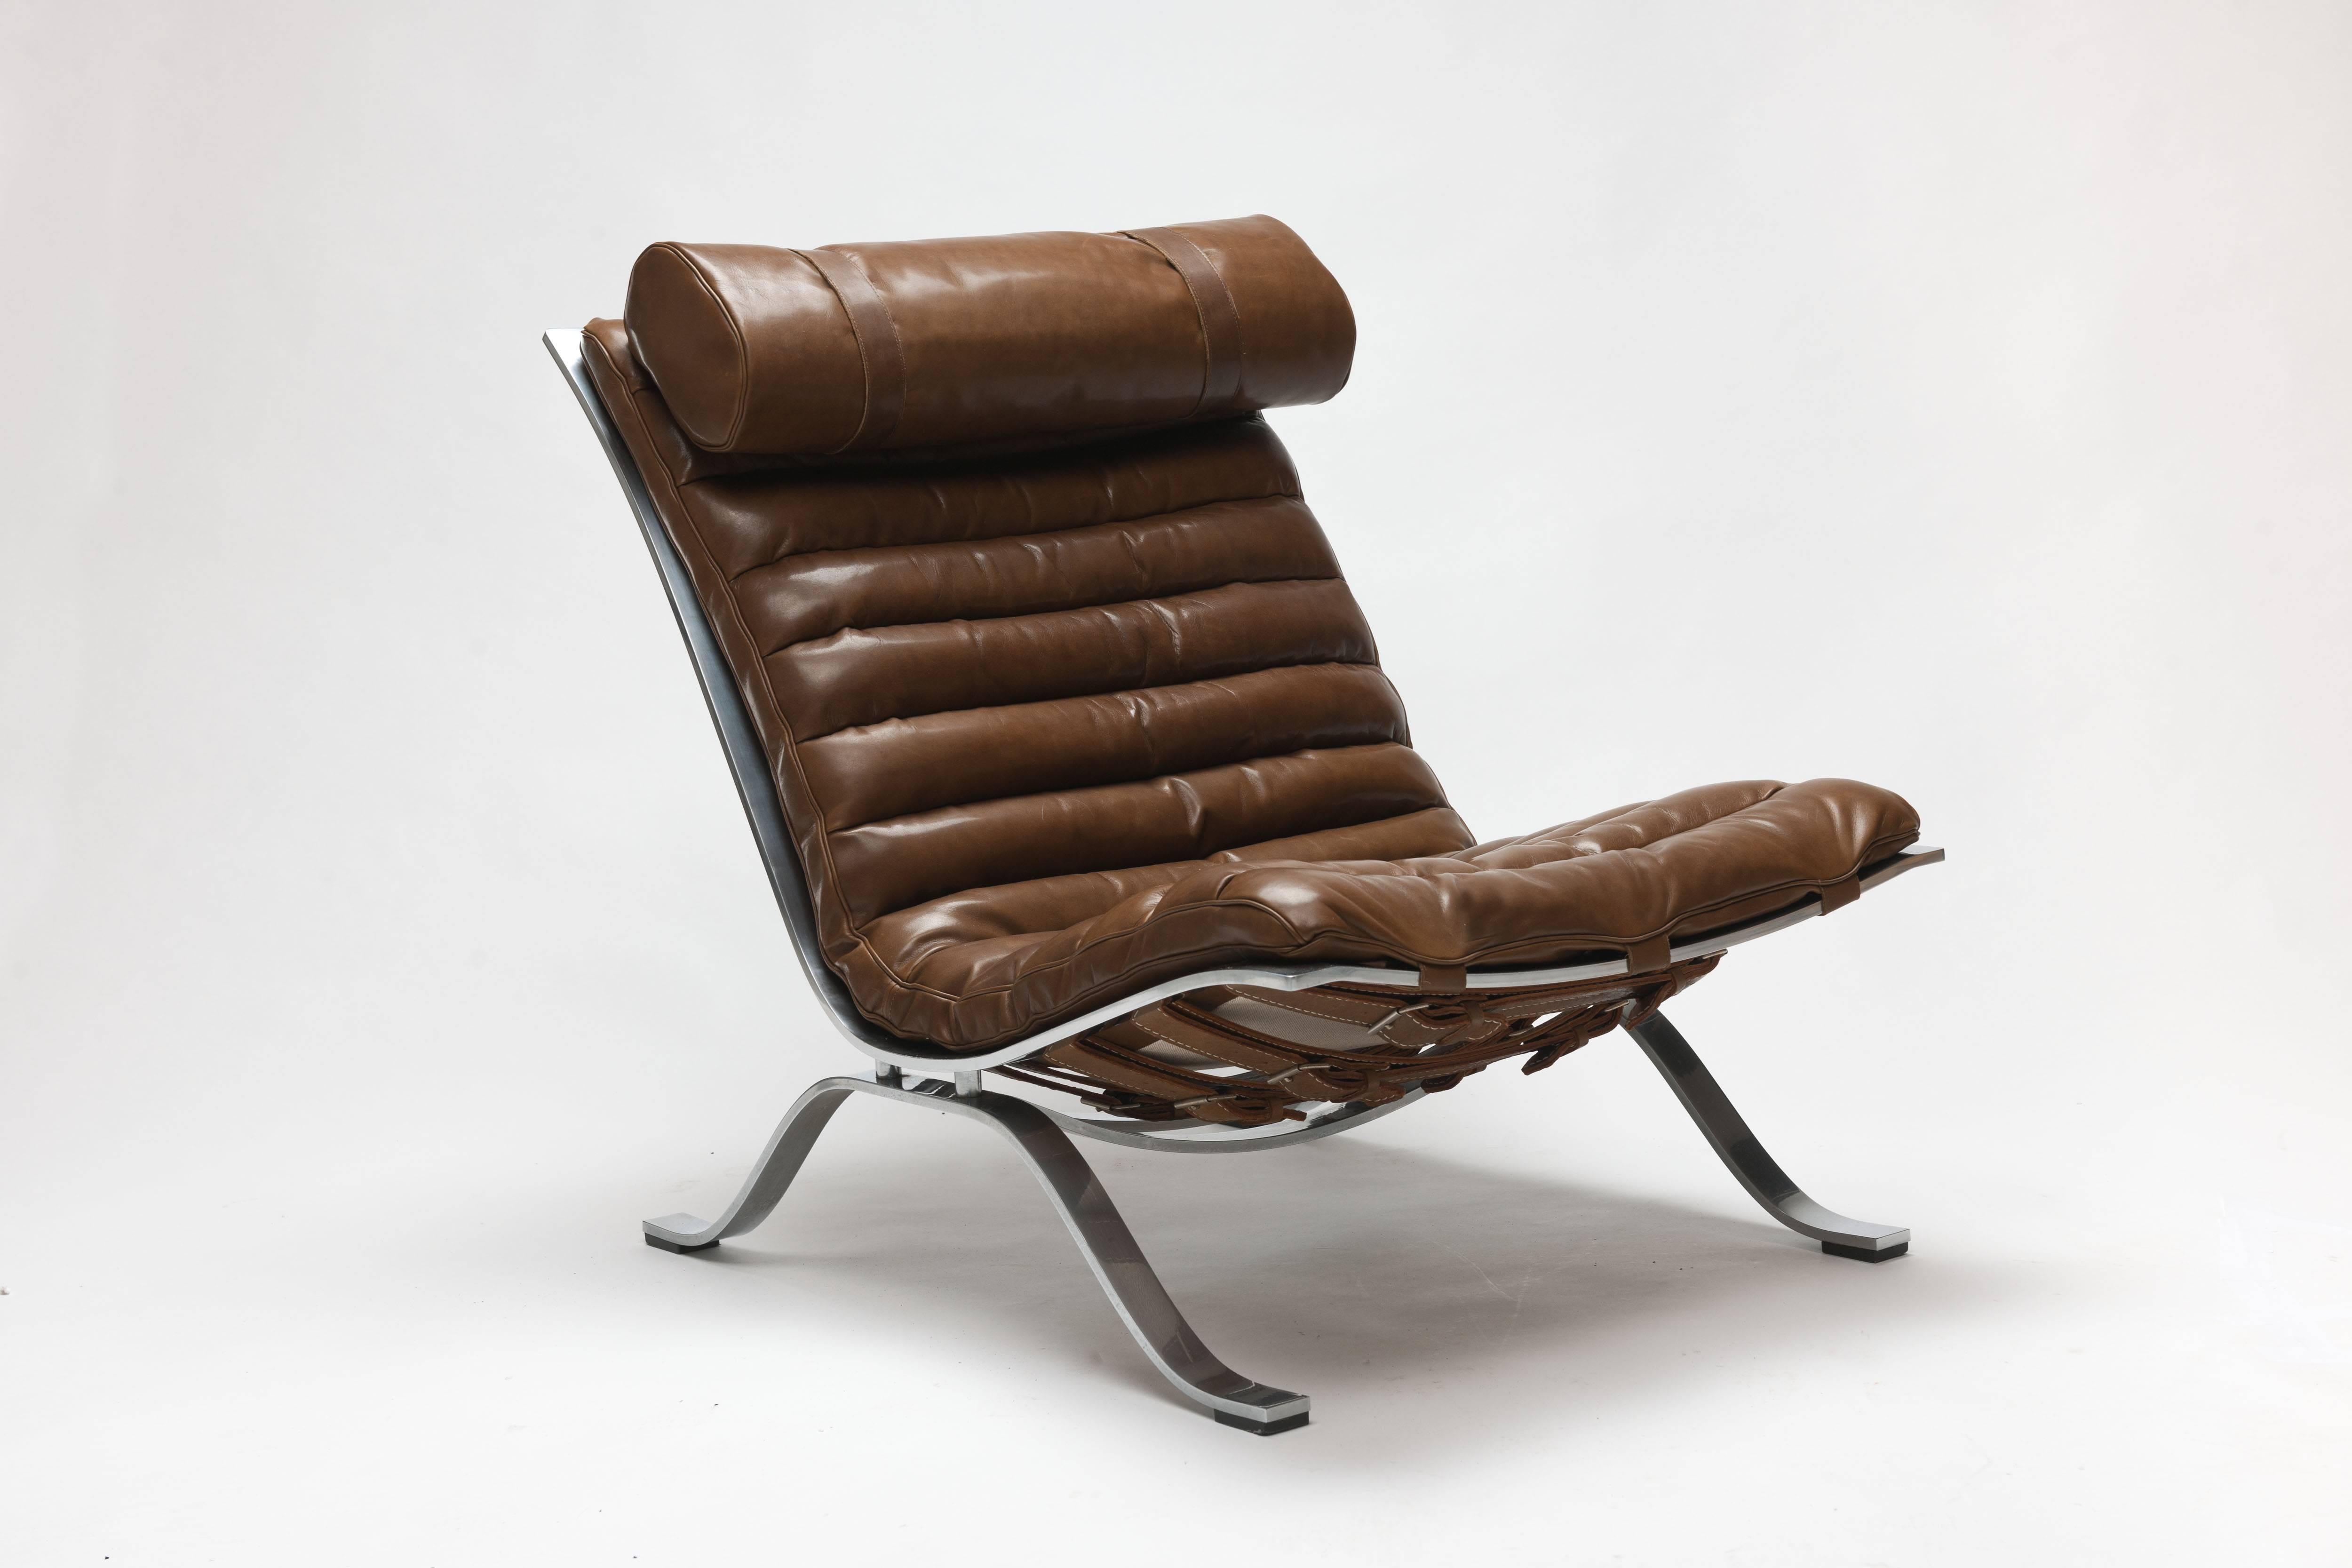 Low slung steel framed leather 'Ari' Lounge chair by Swedish designer Arne Norell, originally designed in 1966. 
This vintage lounge chair comes with new upholstery, executed in a refined bronze color leather, which is made by the original